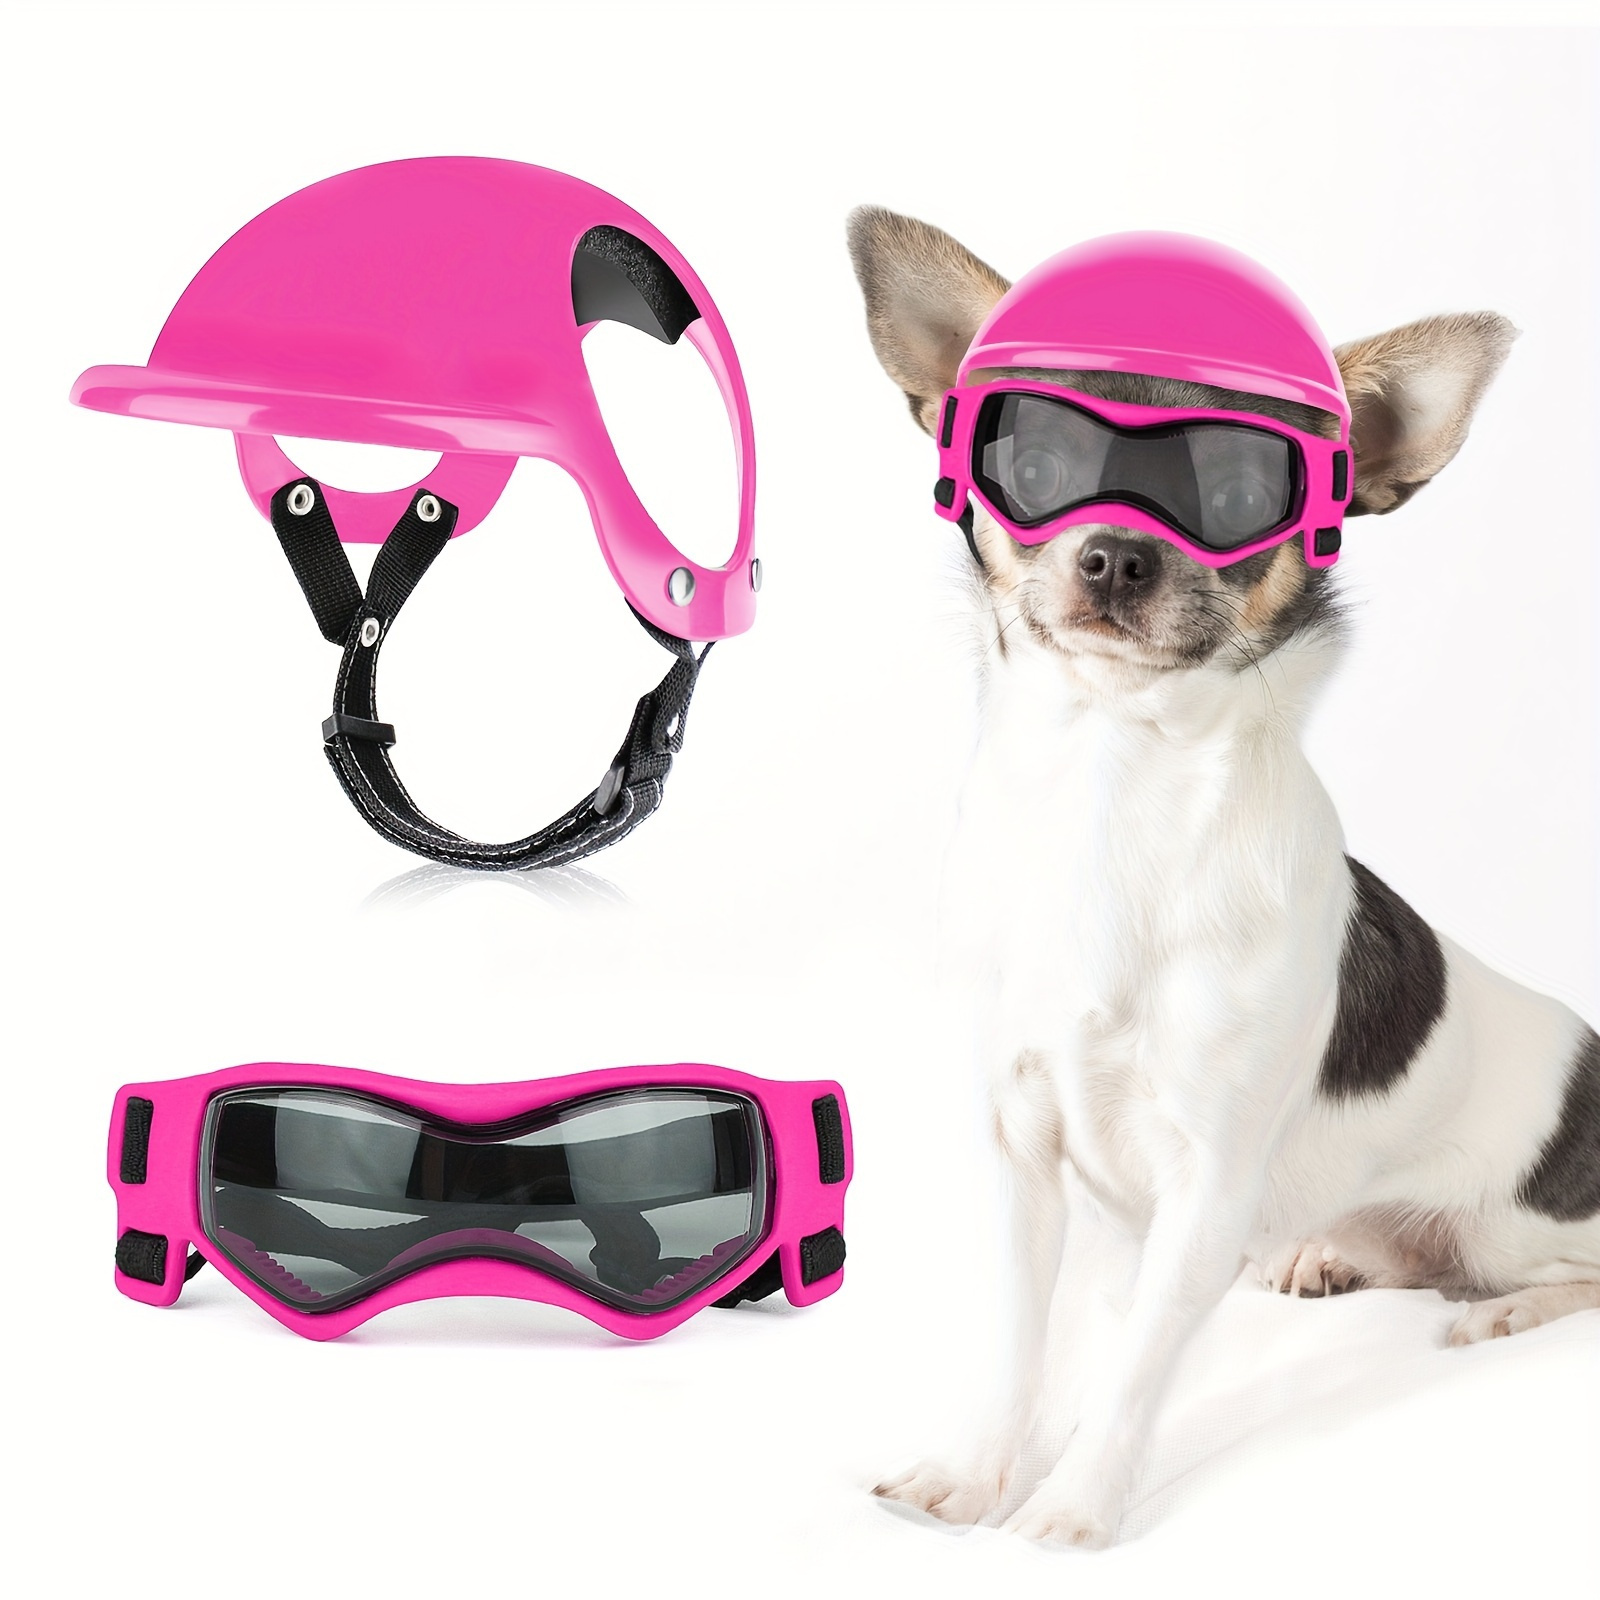 

Pet Helmet And Uv Protection Goggles Set For Small Dogs - Anti-wind Pet Headgear And Sunglasses Combo For Sports And Safety